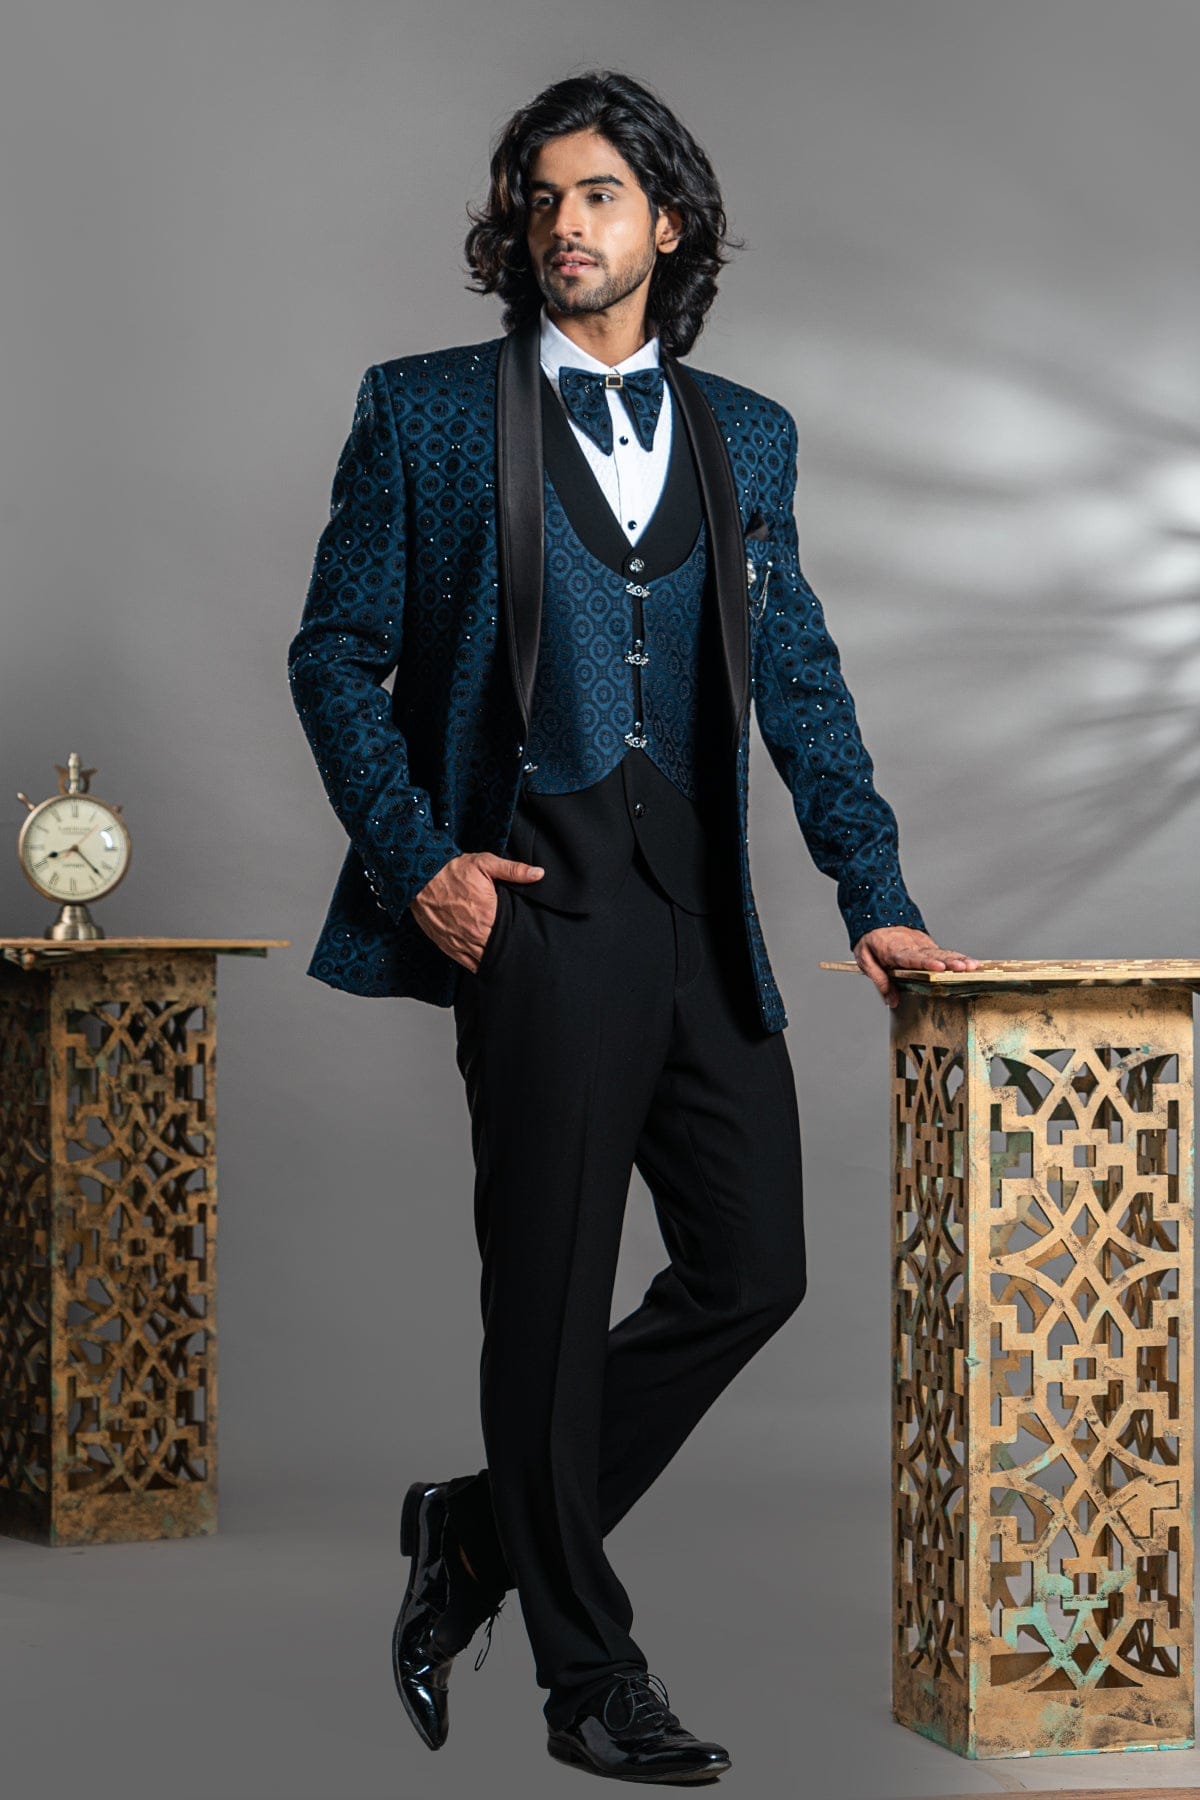 Buy Peacock Blue Three Piece Suit for Men for Men Formal Event Attire for  Every Occasion Tailored Fit, the Rising Sun Store, Vardo Online in India -  Etsy